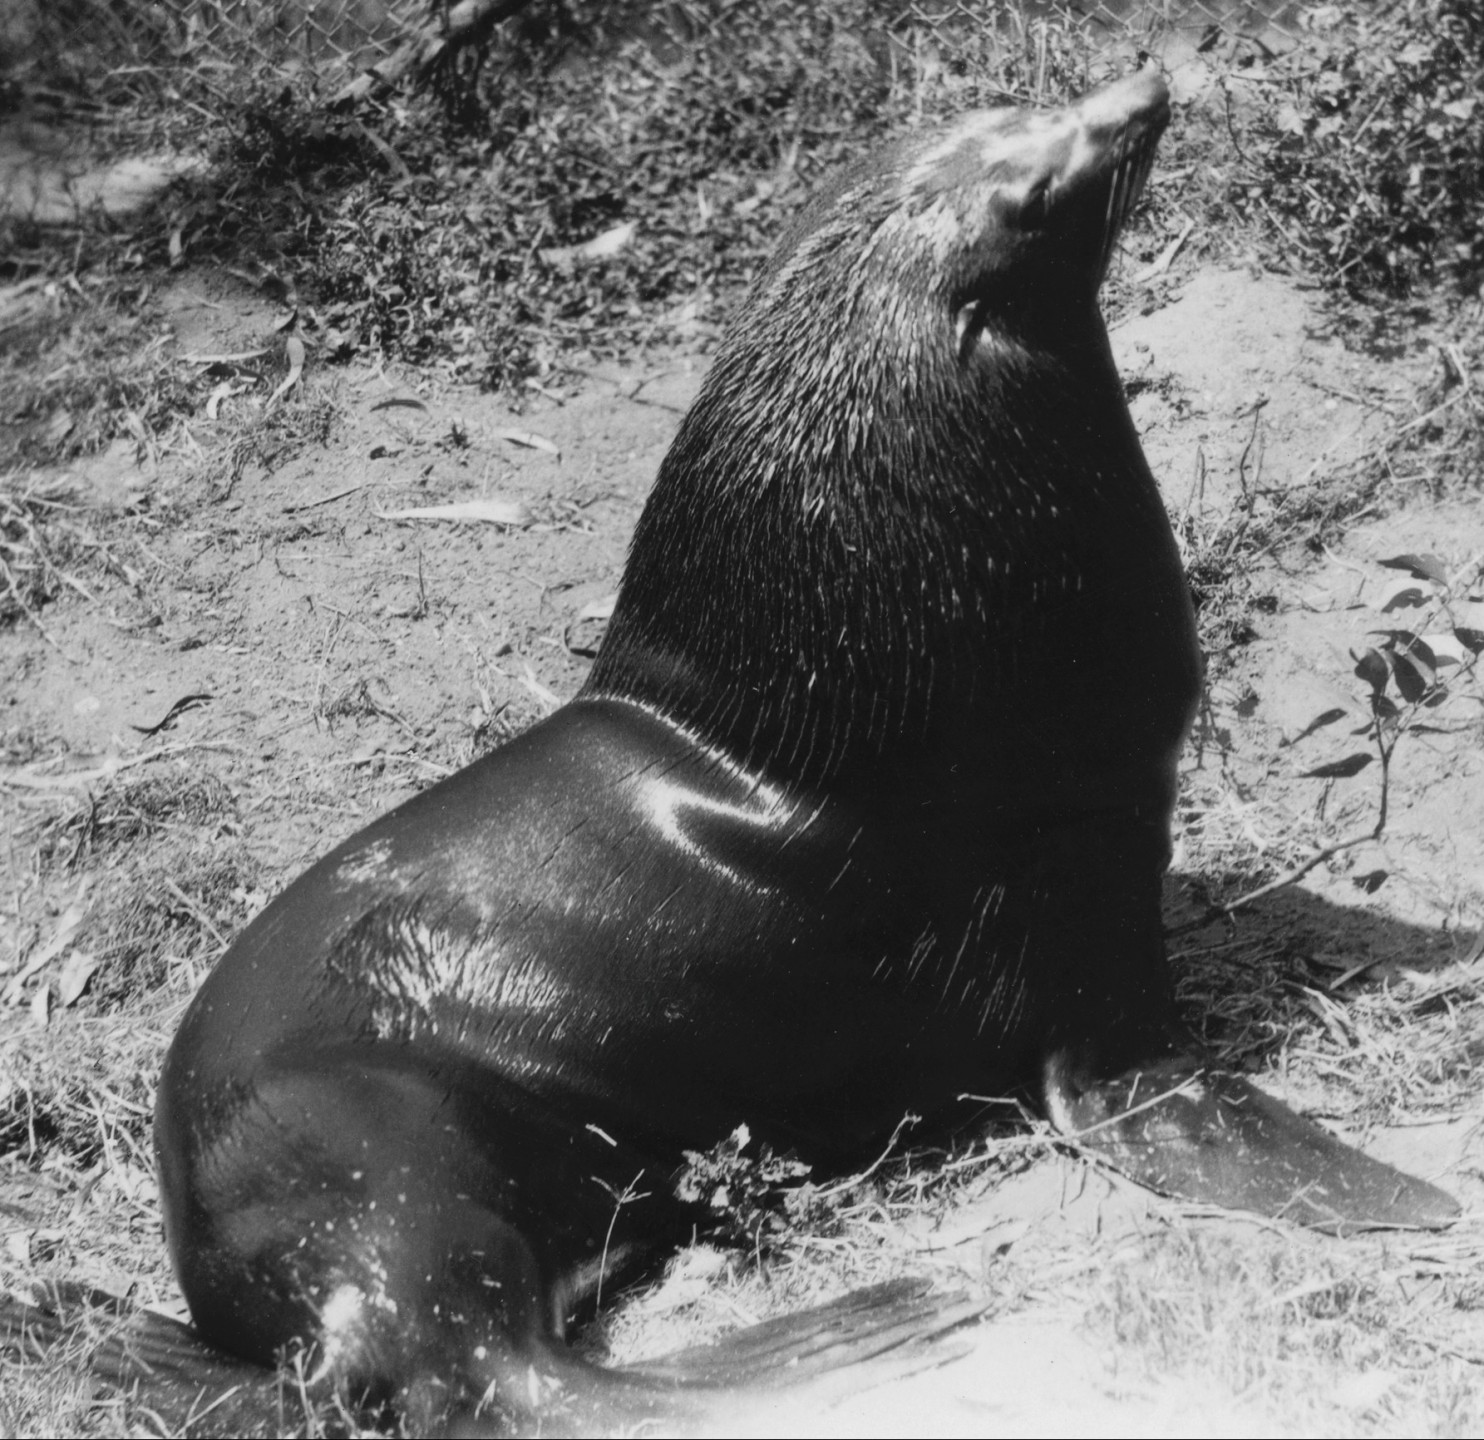 In 1928, a fisherman brought the extraordinarily rare find of two male Guadalupe fur seals to the San Diego Zoo. The species had been thought to be extinct, until the fisherman found a small population that he told Dr. Harry about while Dr. Harry was on an expedition in Mexico. The hope was to try to find females to bring to the Zoo as well, in order to create a breeding group to try to increase the population of this nearly-extinct species, but unfortunately that effort was unsuccessful. 